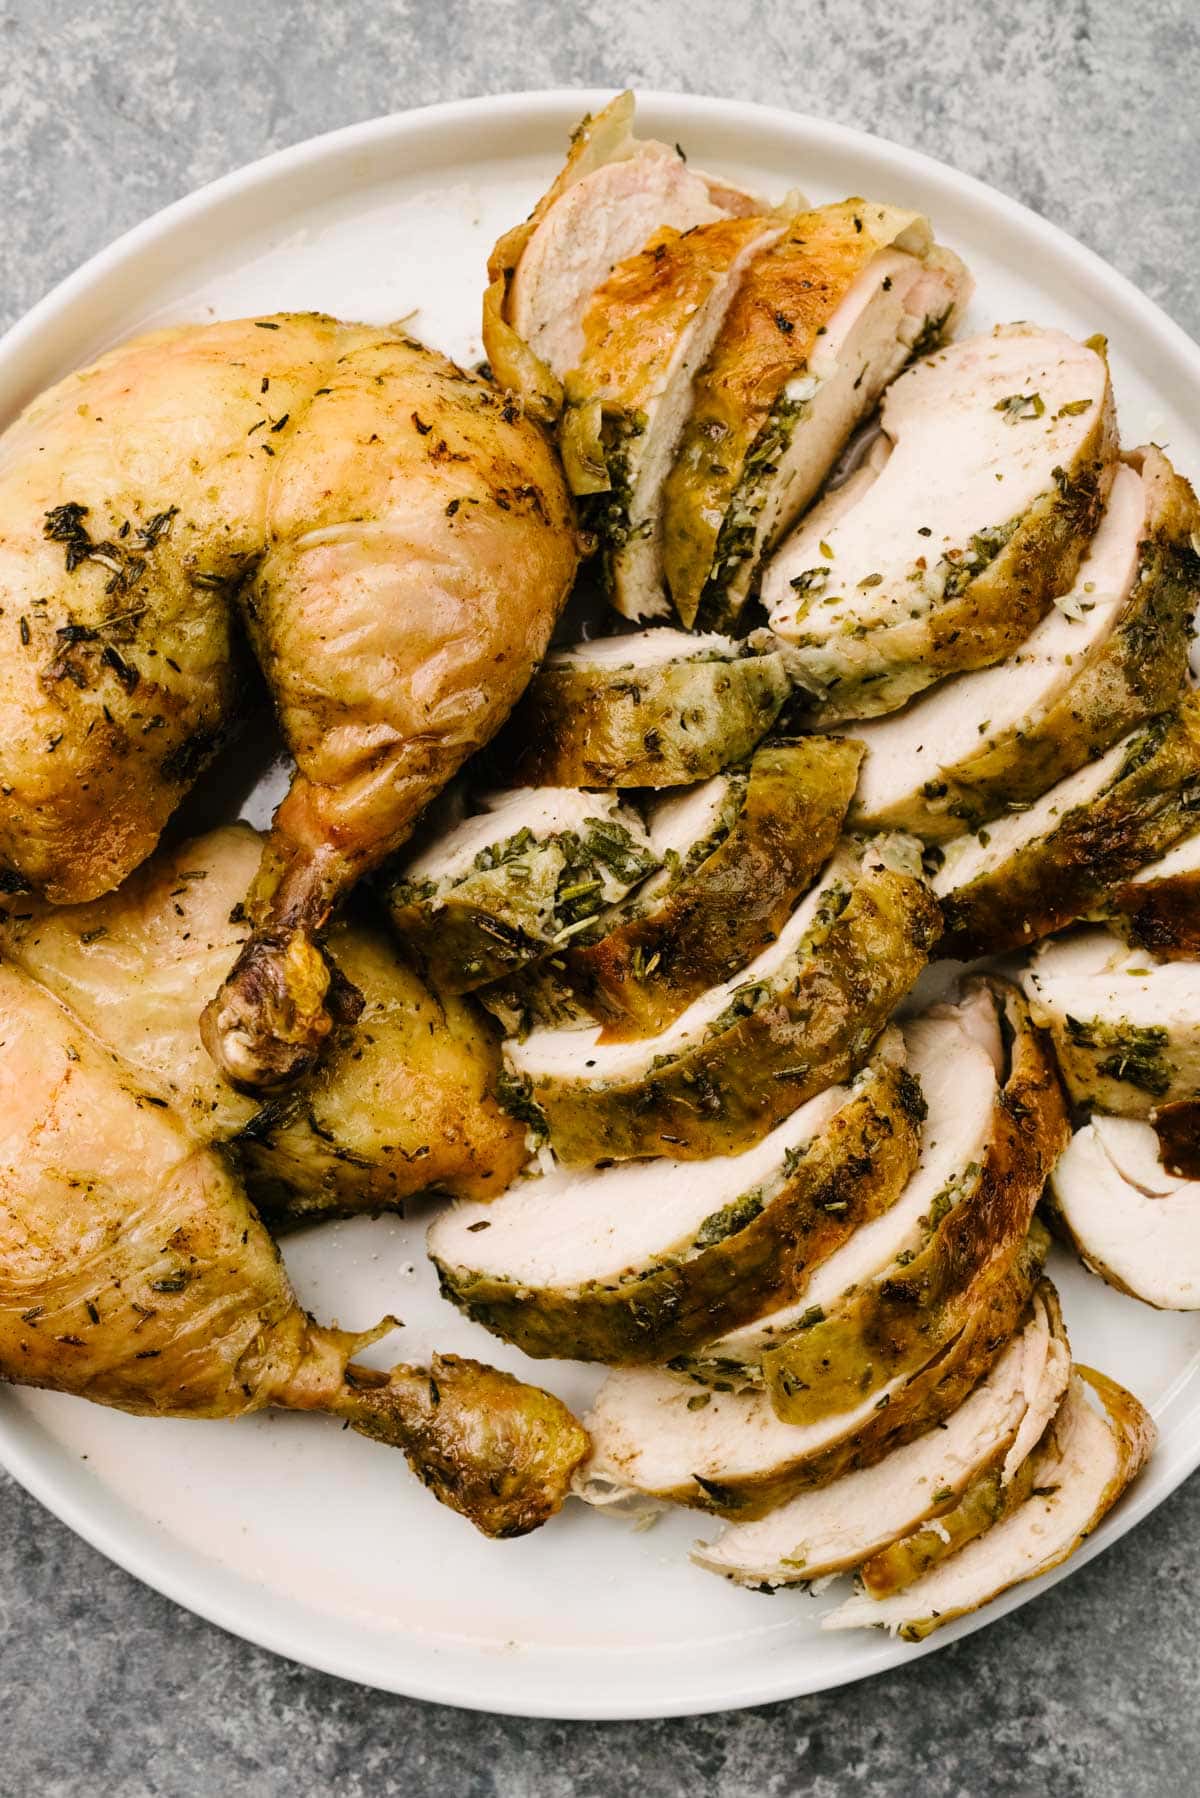 A carved herb roasted chicken on a white plate - two chicken thighs with legs attached and sliced pieces of chicken breast.